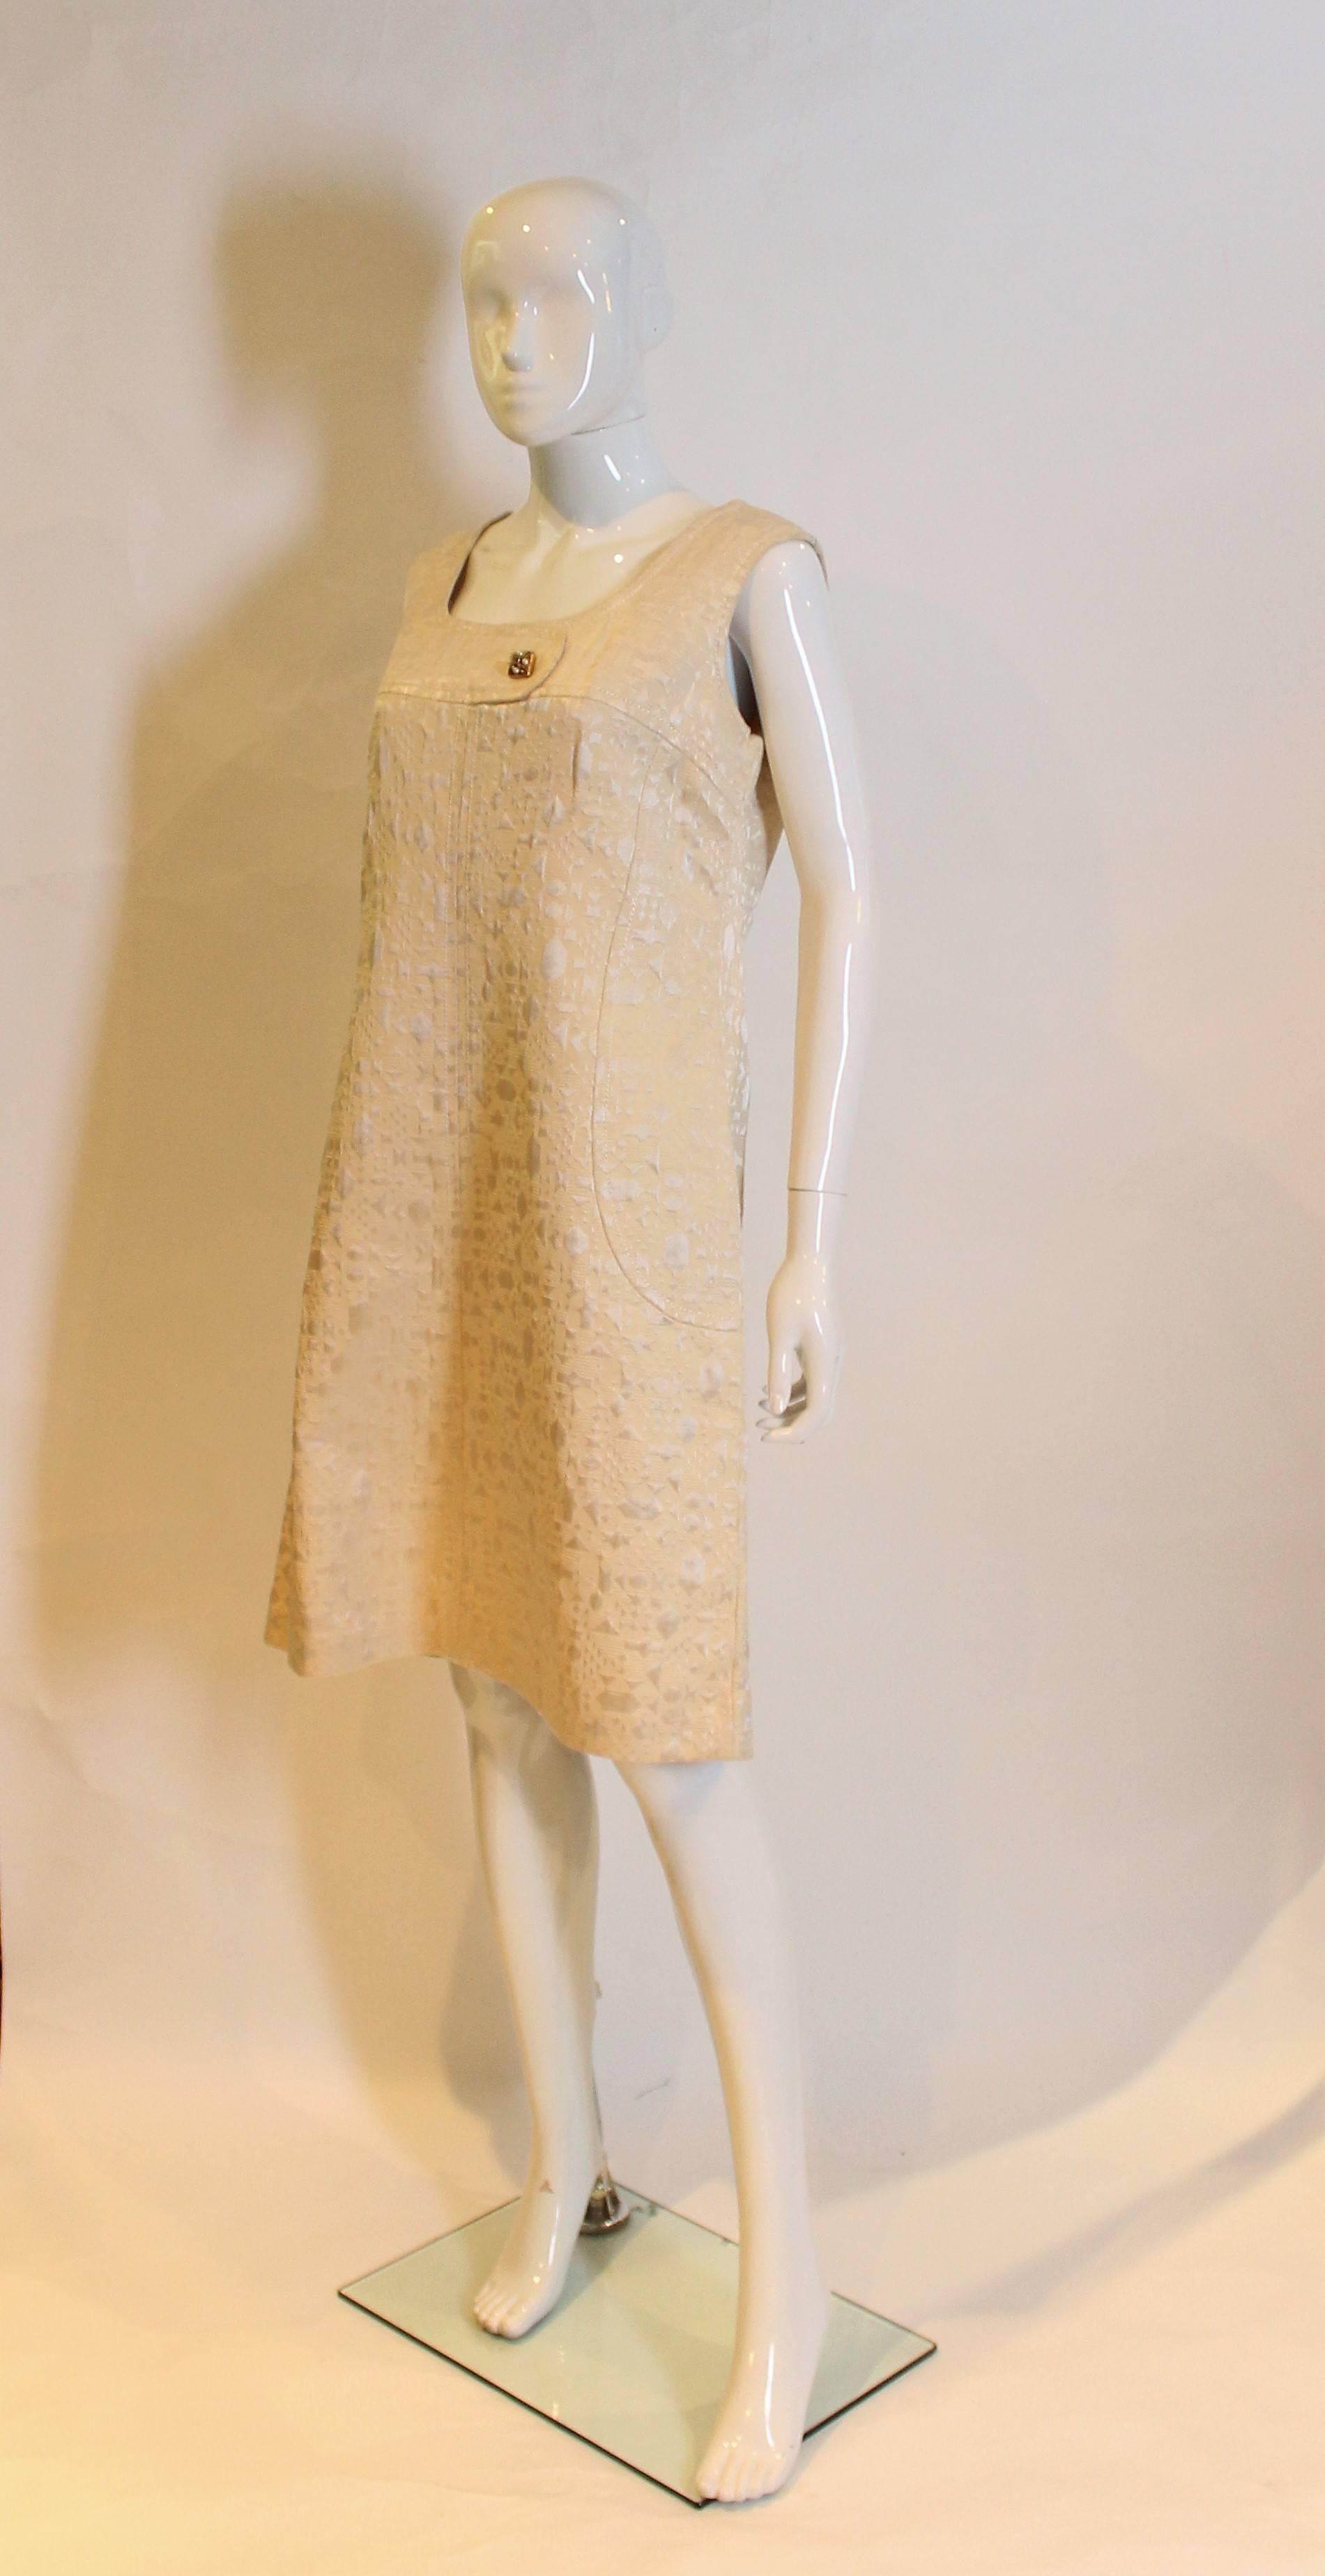 A chic shift dress from the 1960, ideal for a city wedding. The dress is made of a gold broacde like fabric with a deep square neckine and no sleeves.It has a zip opening at the back and an A lline skirt .